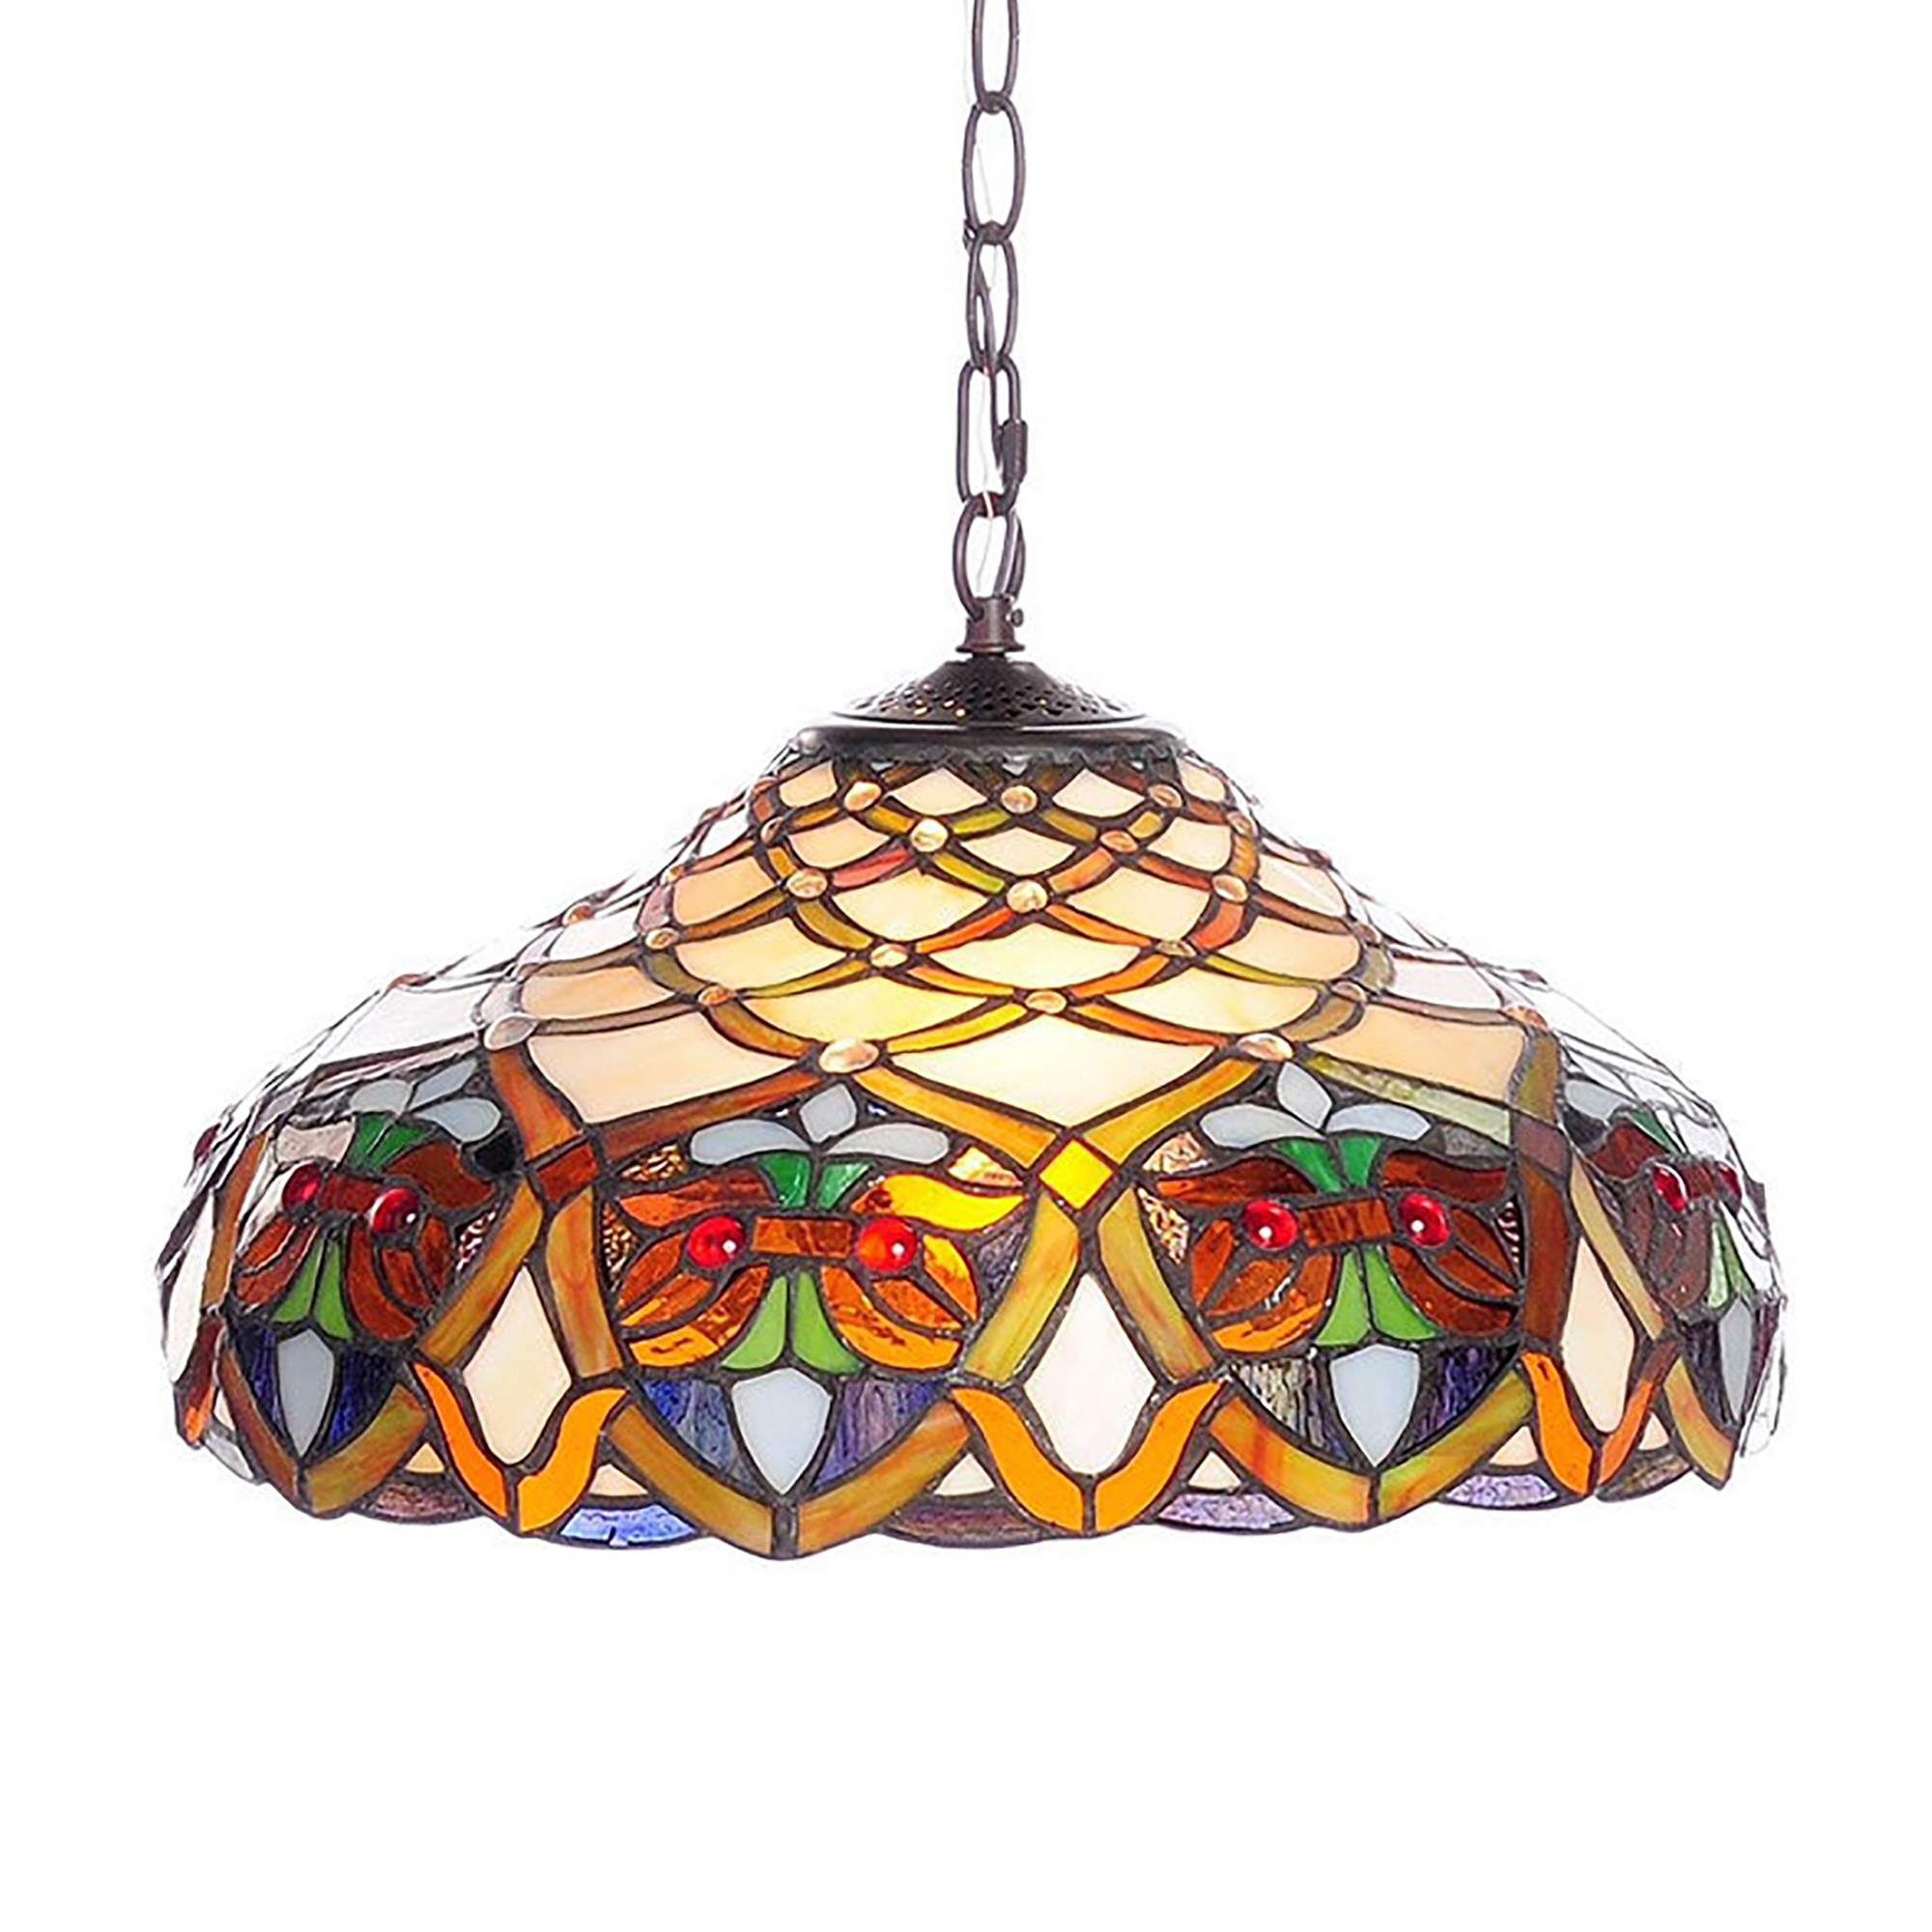 Famous Brand-style Ariel Hanging Ceiling Fixture